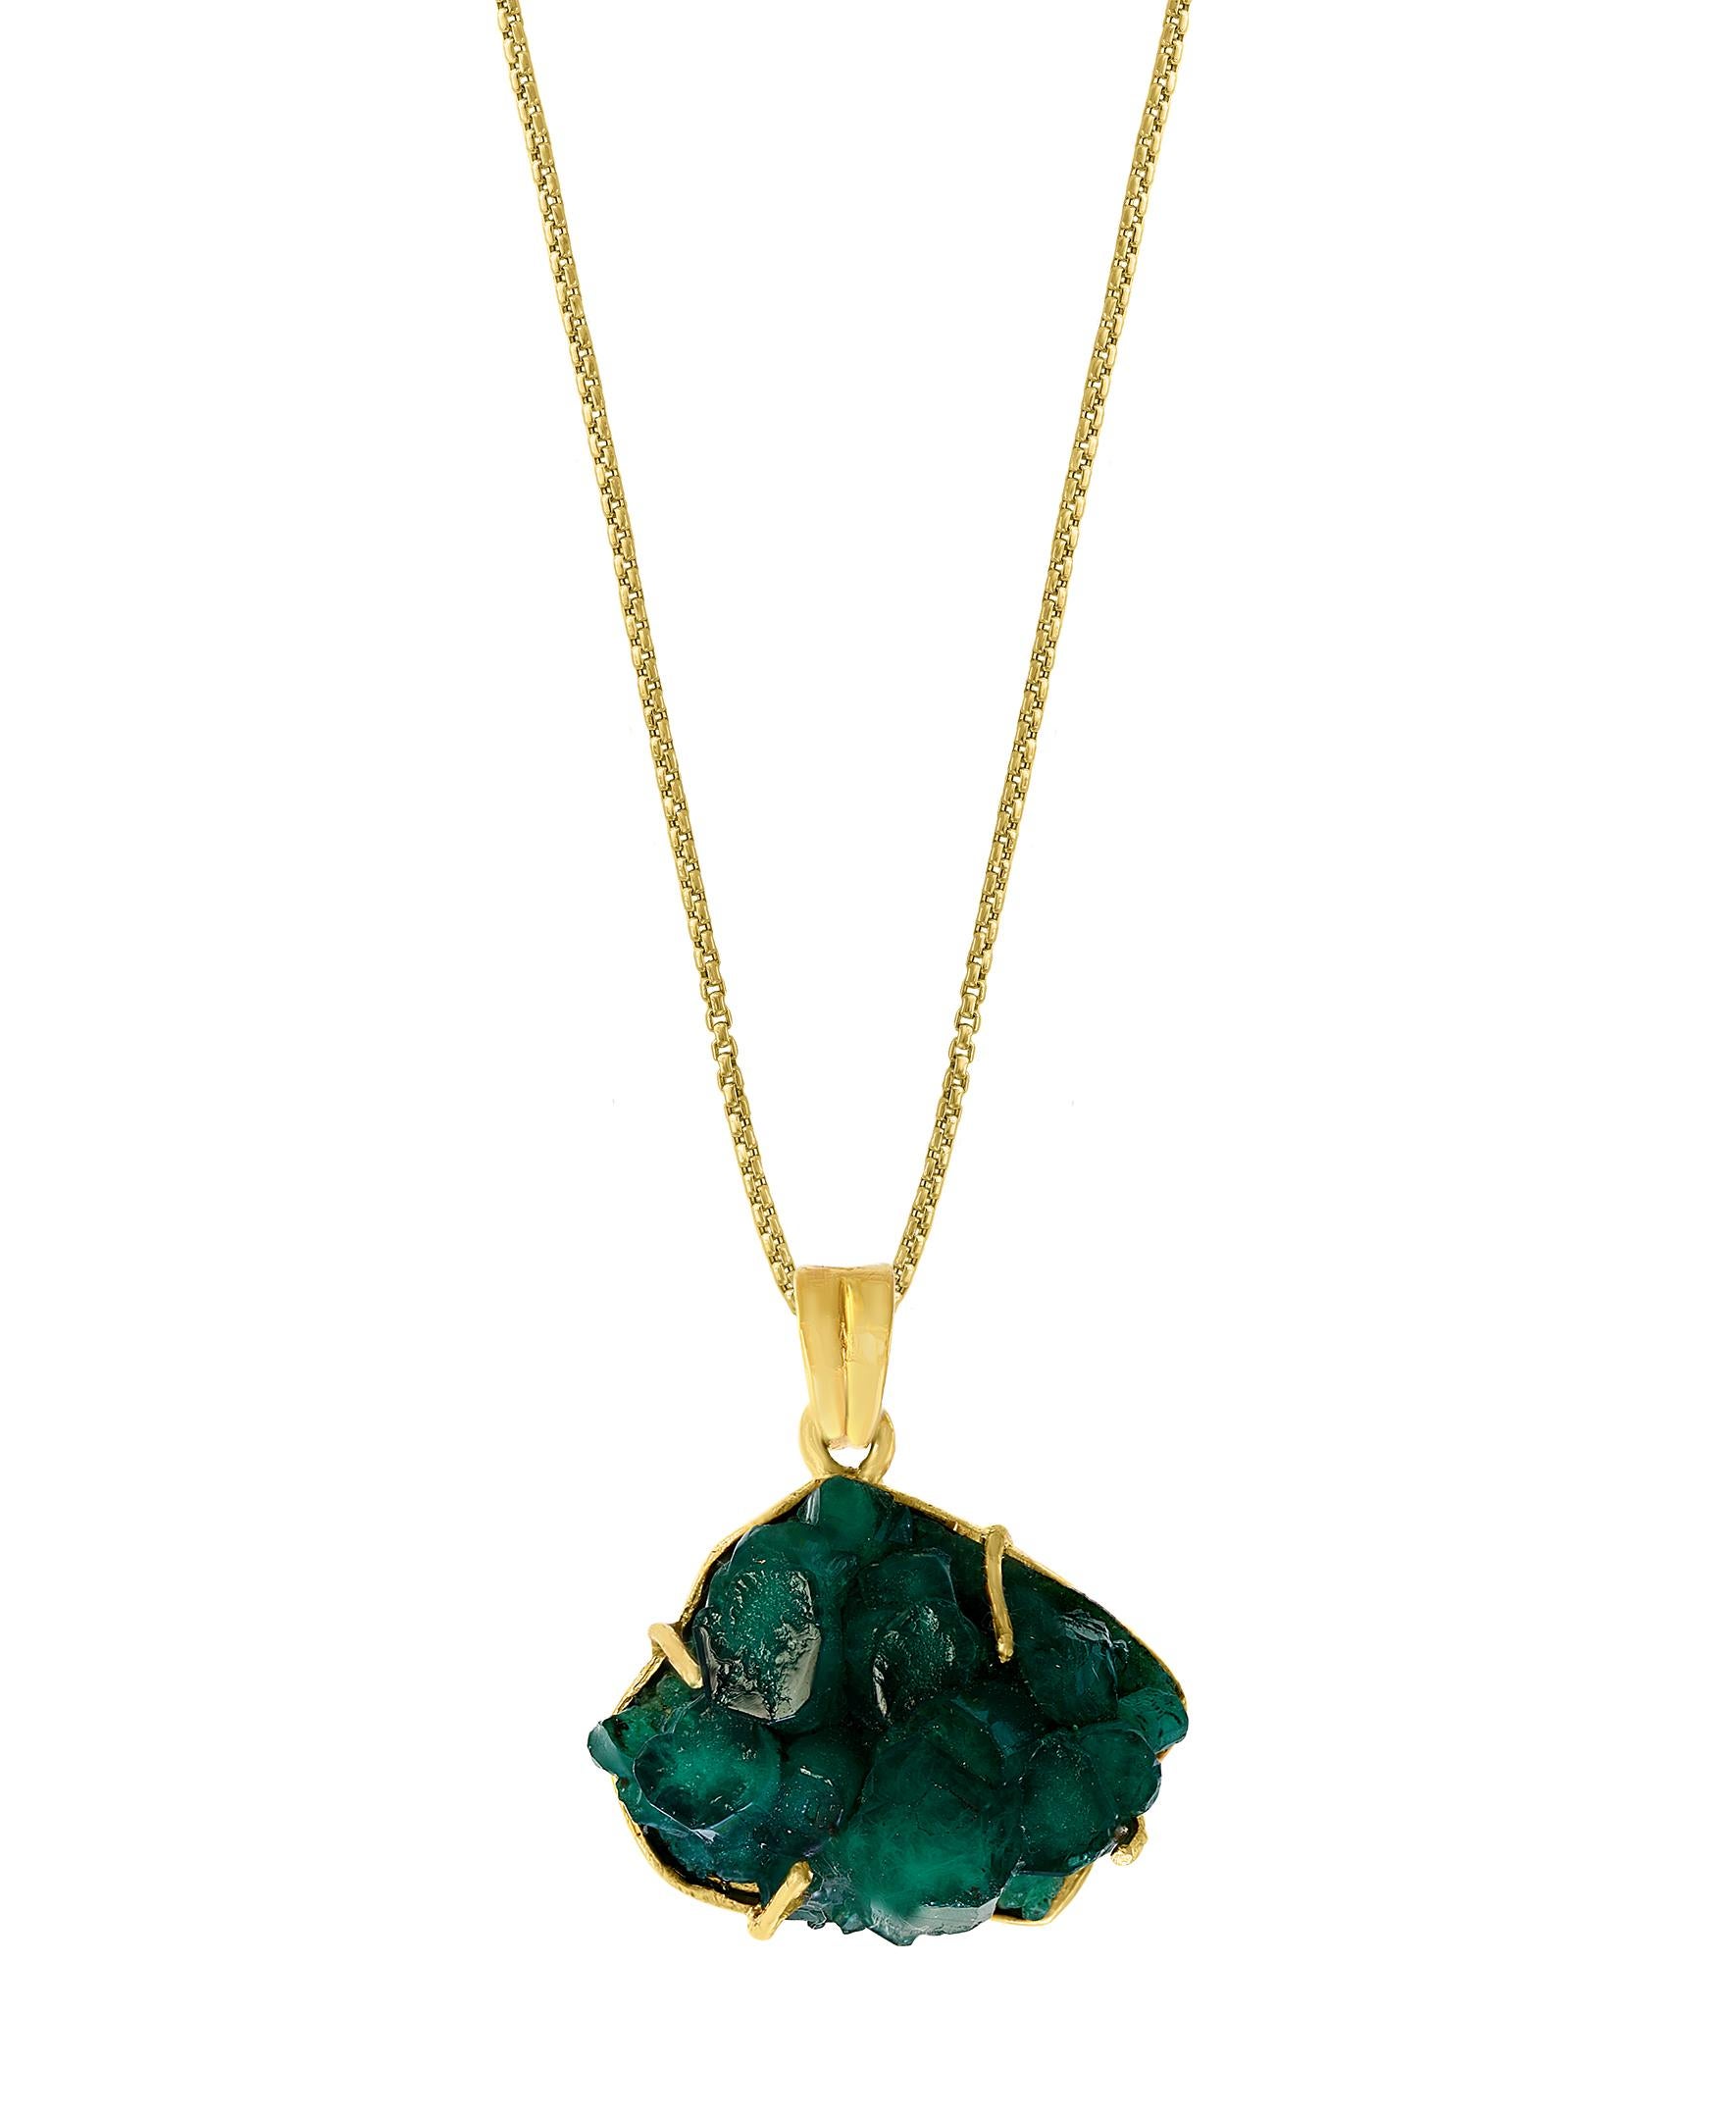 large, breathtaking, statement  piece
This Colombian Emerald Rough Pendant necklace is a eye-catching pendant necklace . It features a large extremely fine  19 ct total weight all set in 18 karat  Yellow Gold. Dangling from a scintillating  bale 